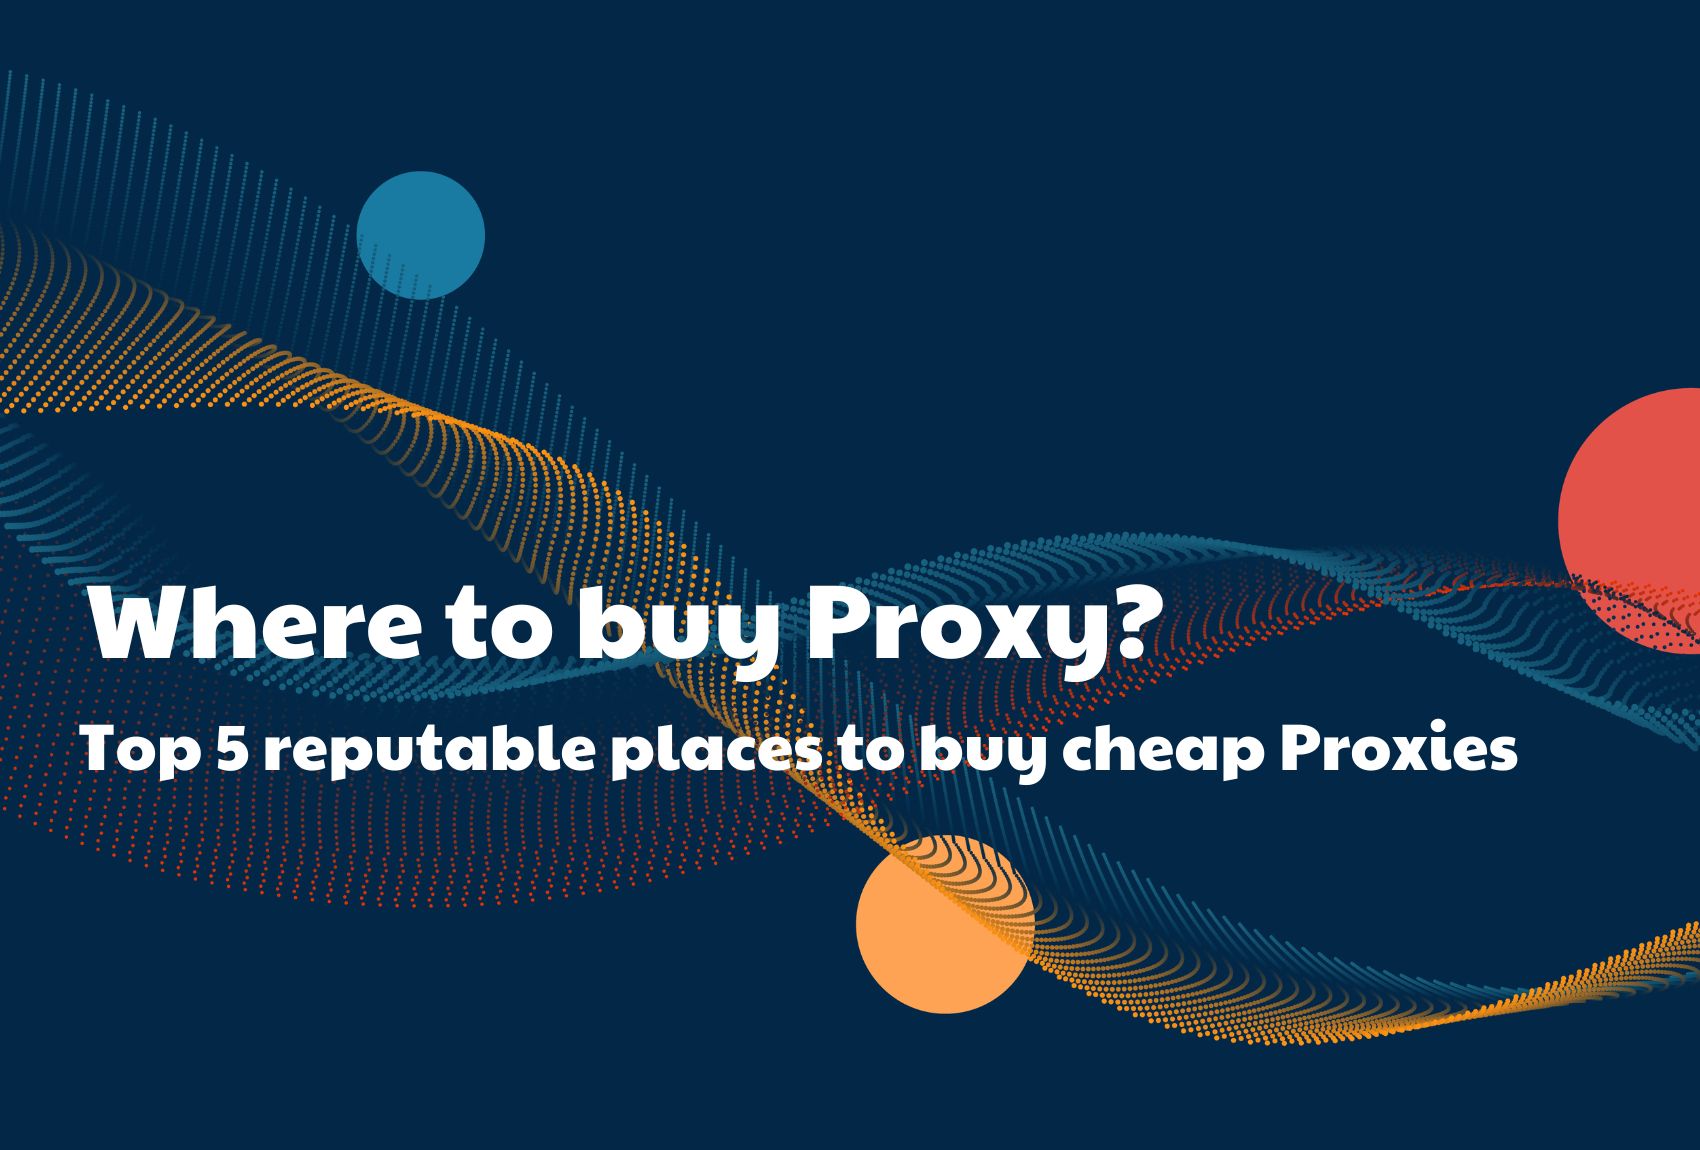 Where to buy Proxy? Top 5 reputable places to buy cheap Proxies